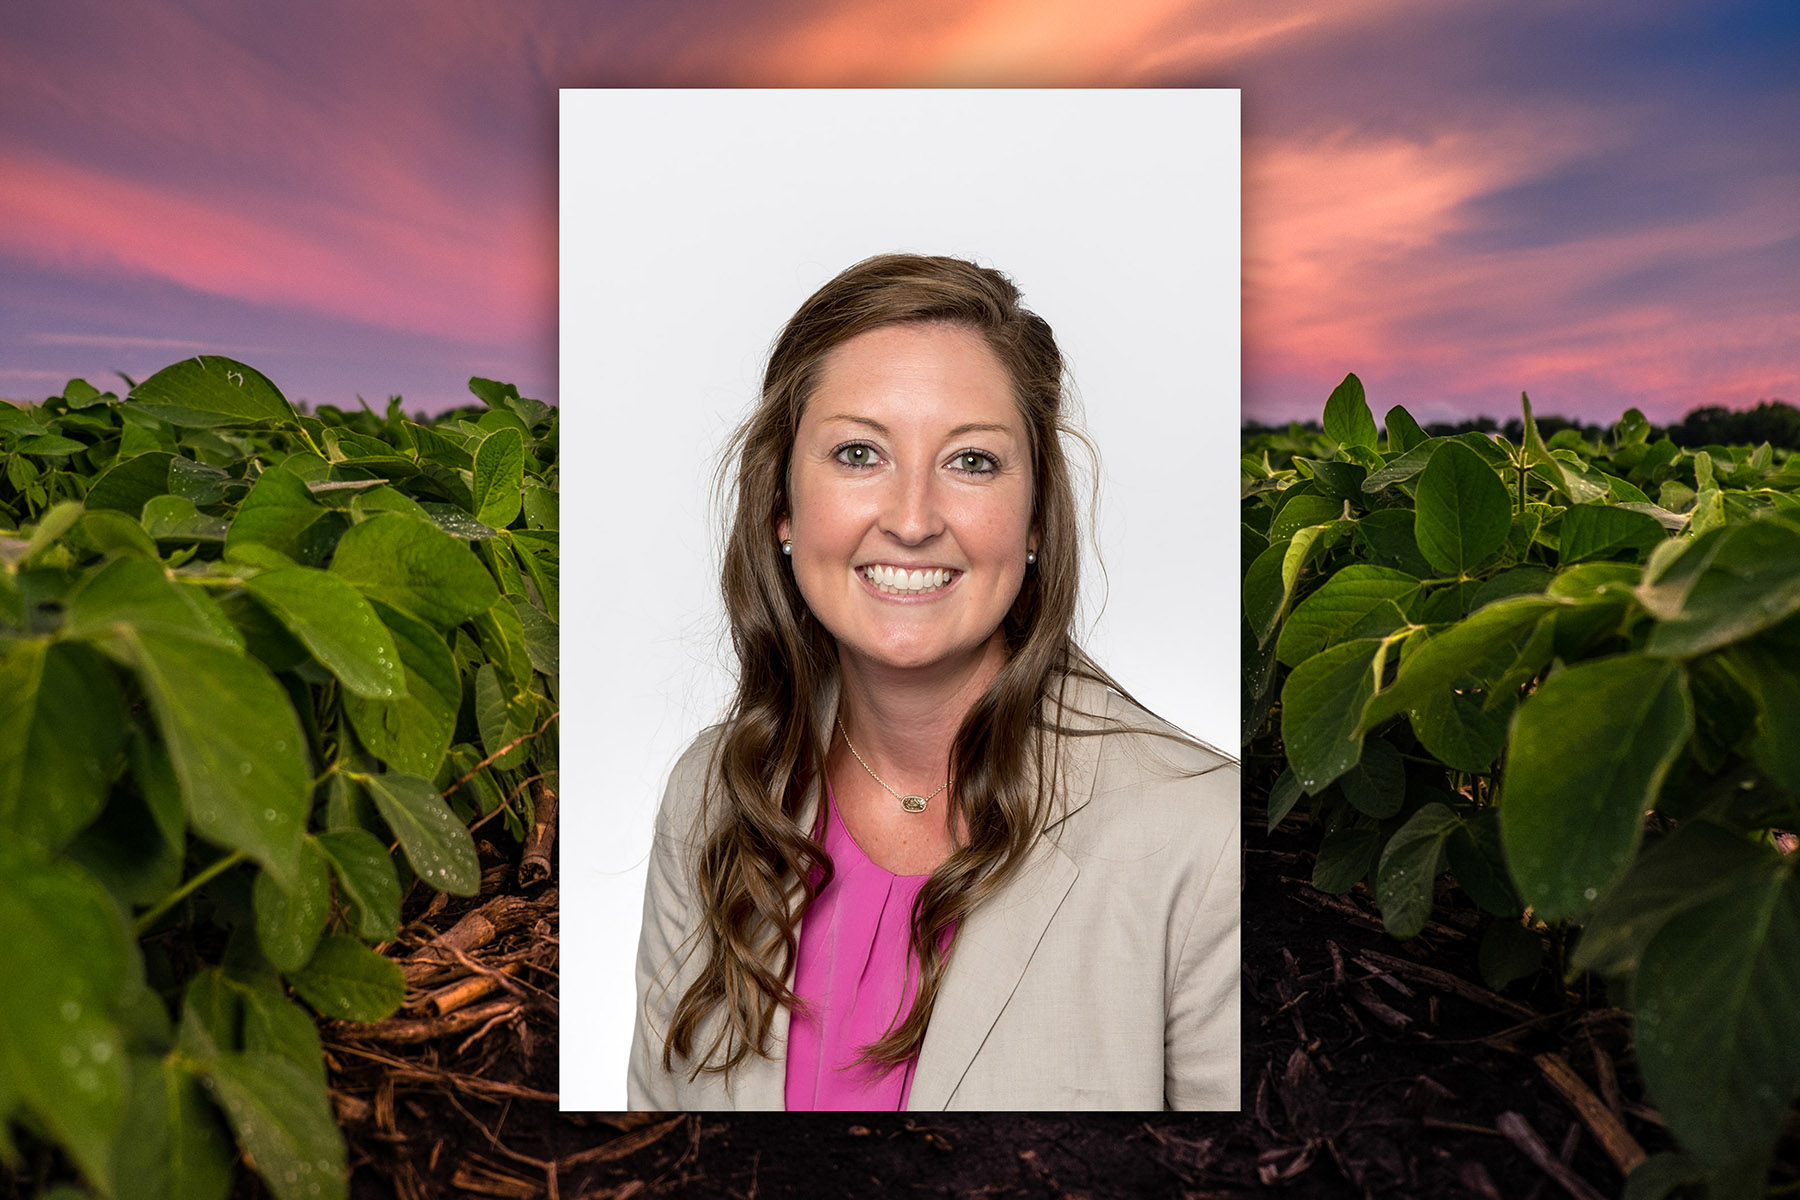 Director of U.S. Soybean Research Collaborative